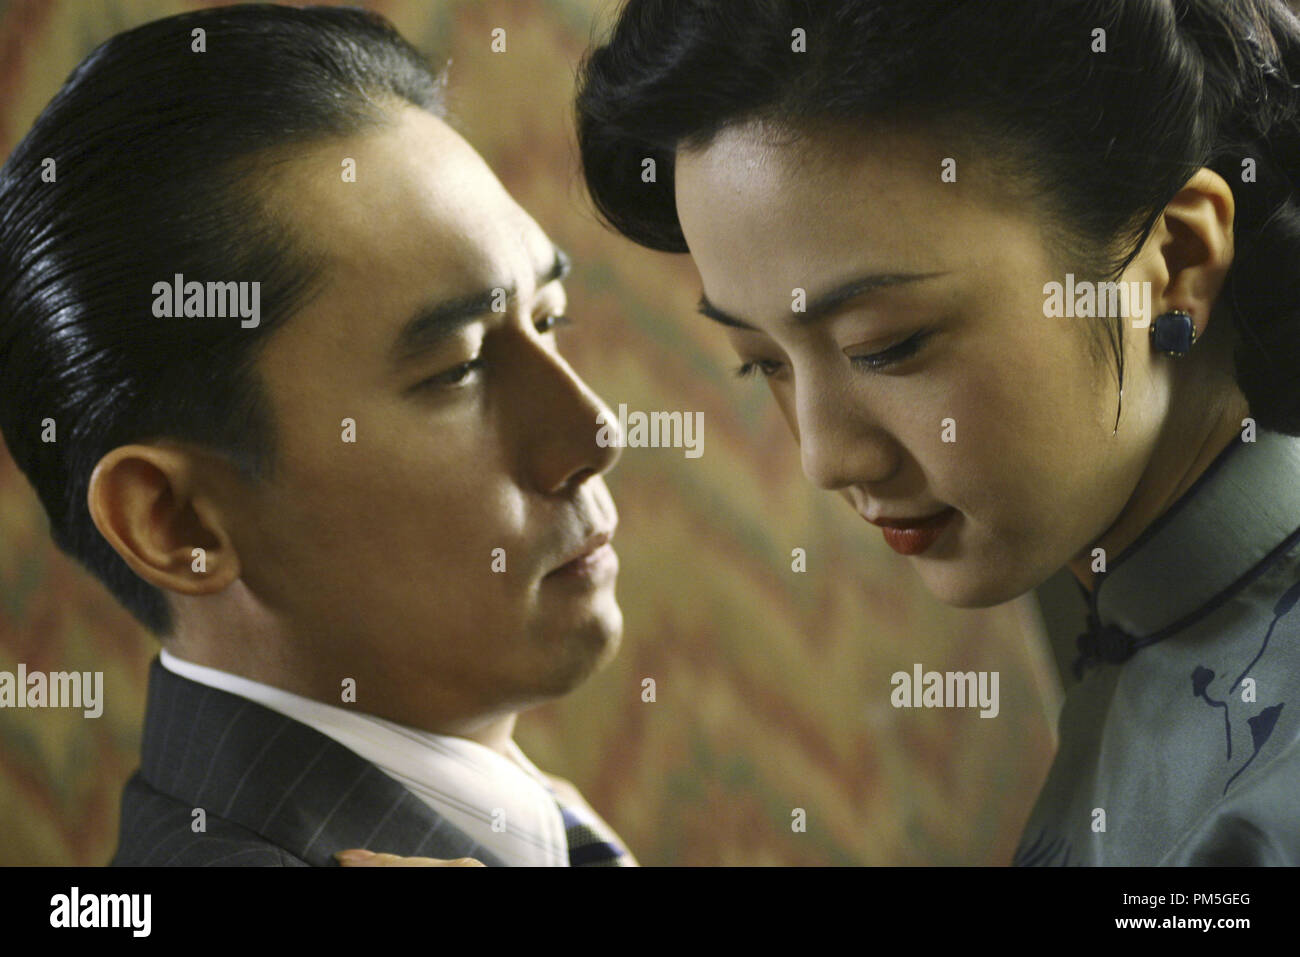 Film Still from 'Lust, Caution' (aka 'Se, jie') Tony Leung Chiu Wai, Tang Wei © 2007 Focus Features Photo credit: Chan Kam Chuen   File Reference # 30738231THA  For Editorial Use Only -  All Rights Reserved Stock Photo